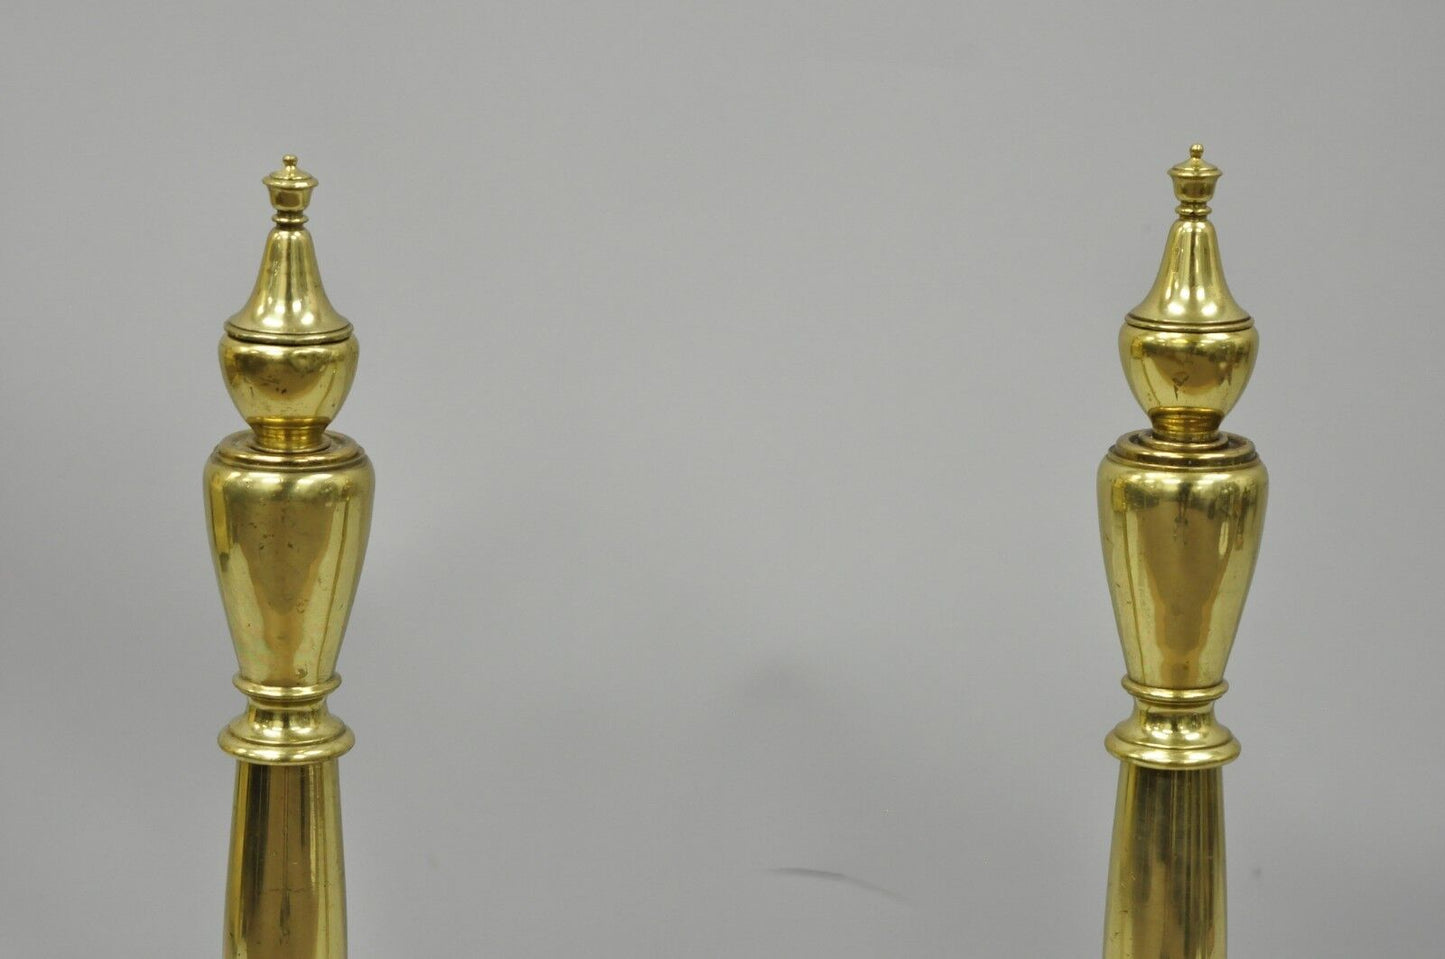 Antique Pair French Art Nouveau Style Brass Fireplace Andirons Urn Finial